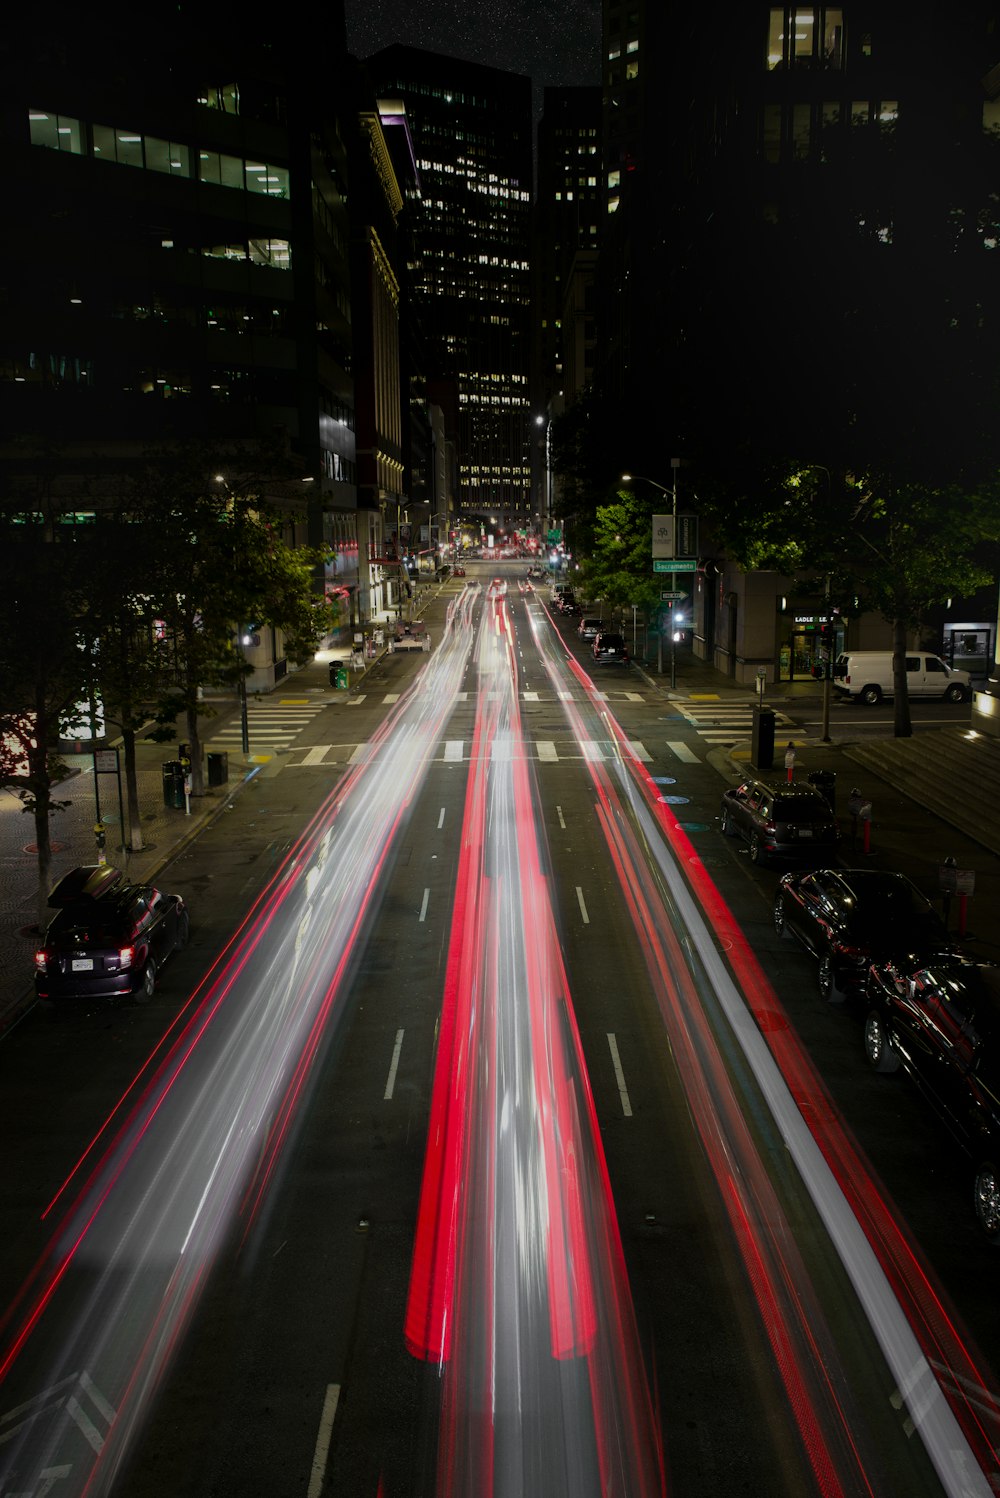 time-lapse photo of vehicles on road during night